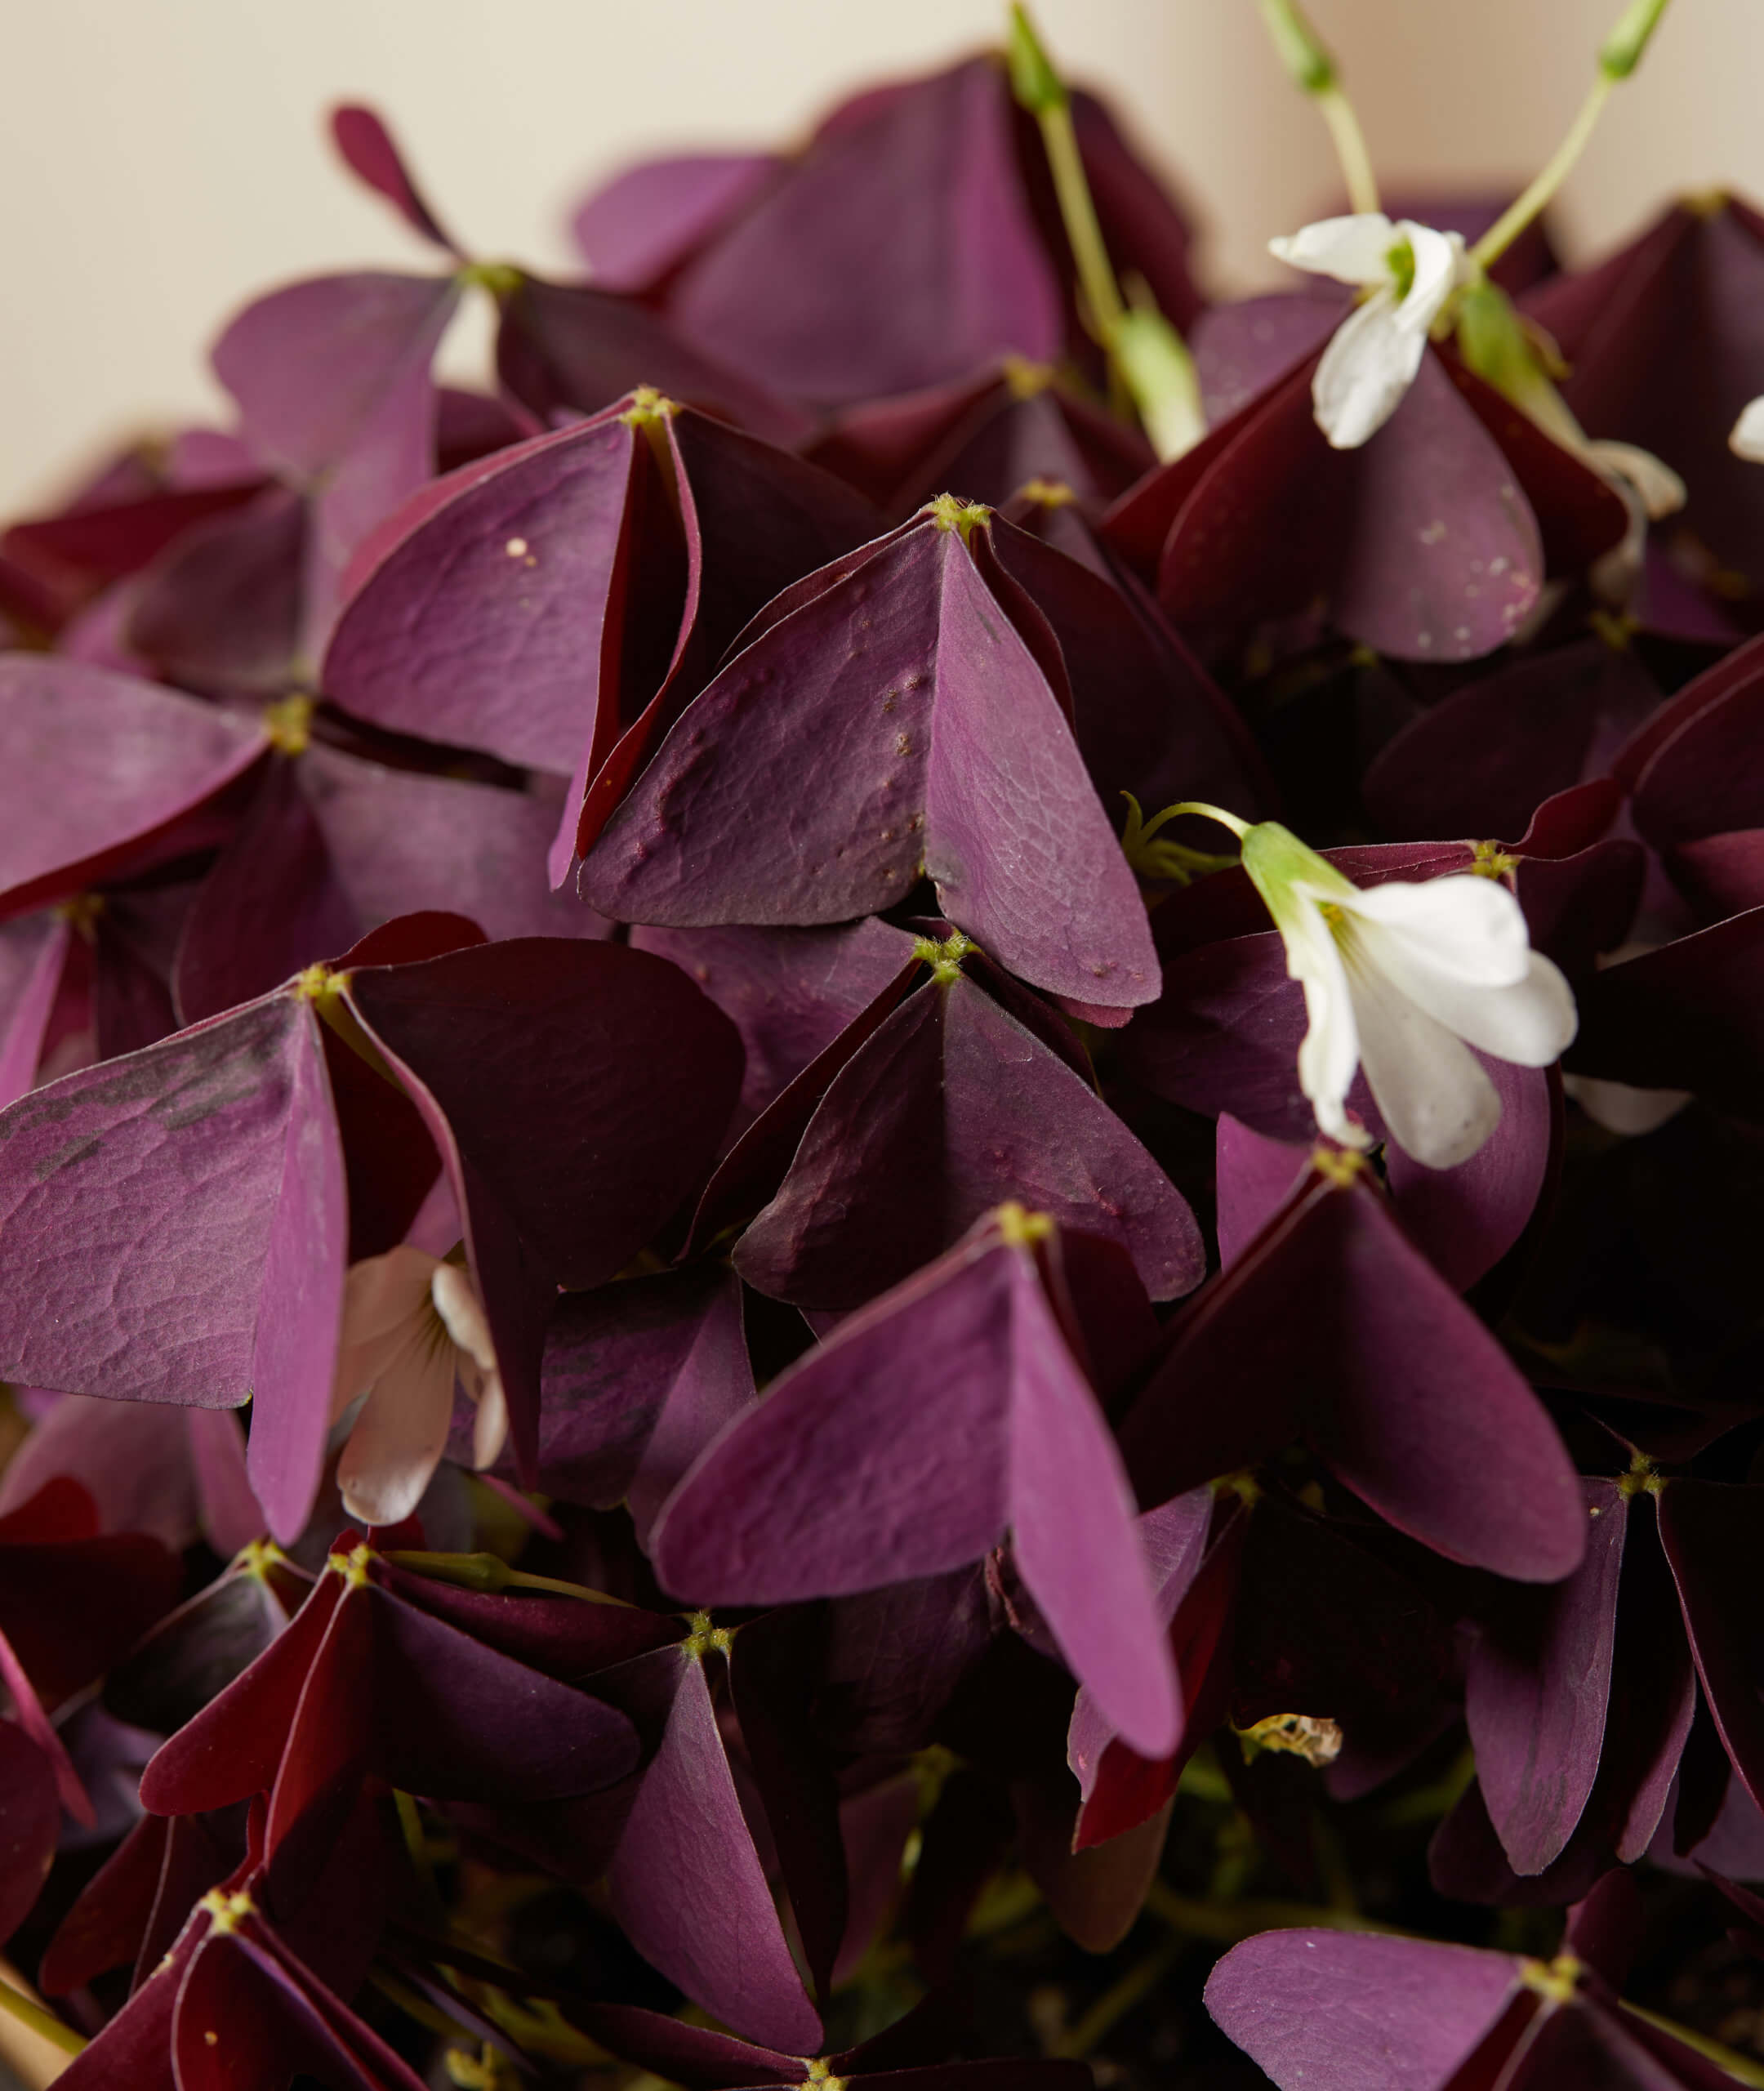 oxalis 101: how to care for oxalis plants | bloomscape